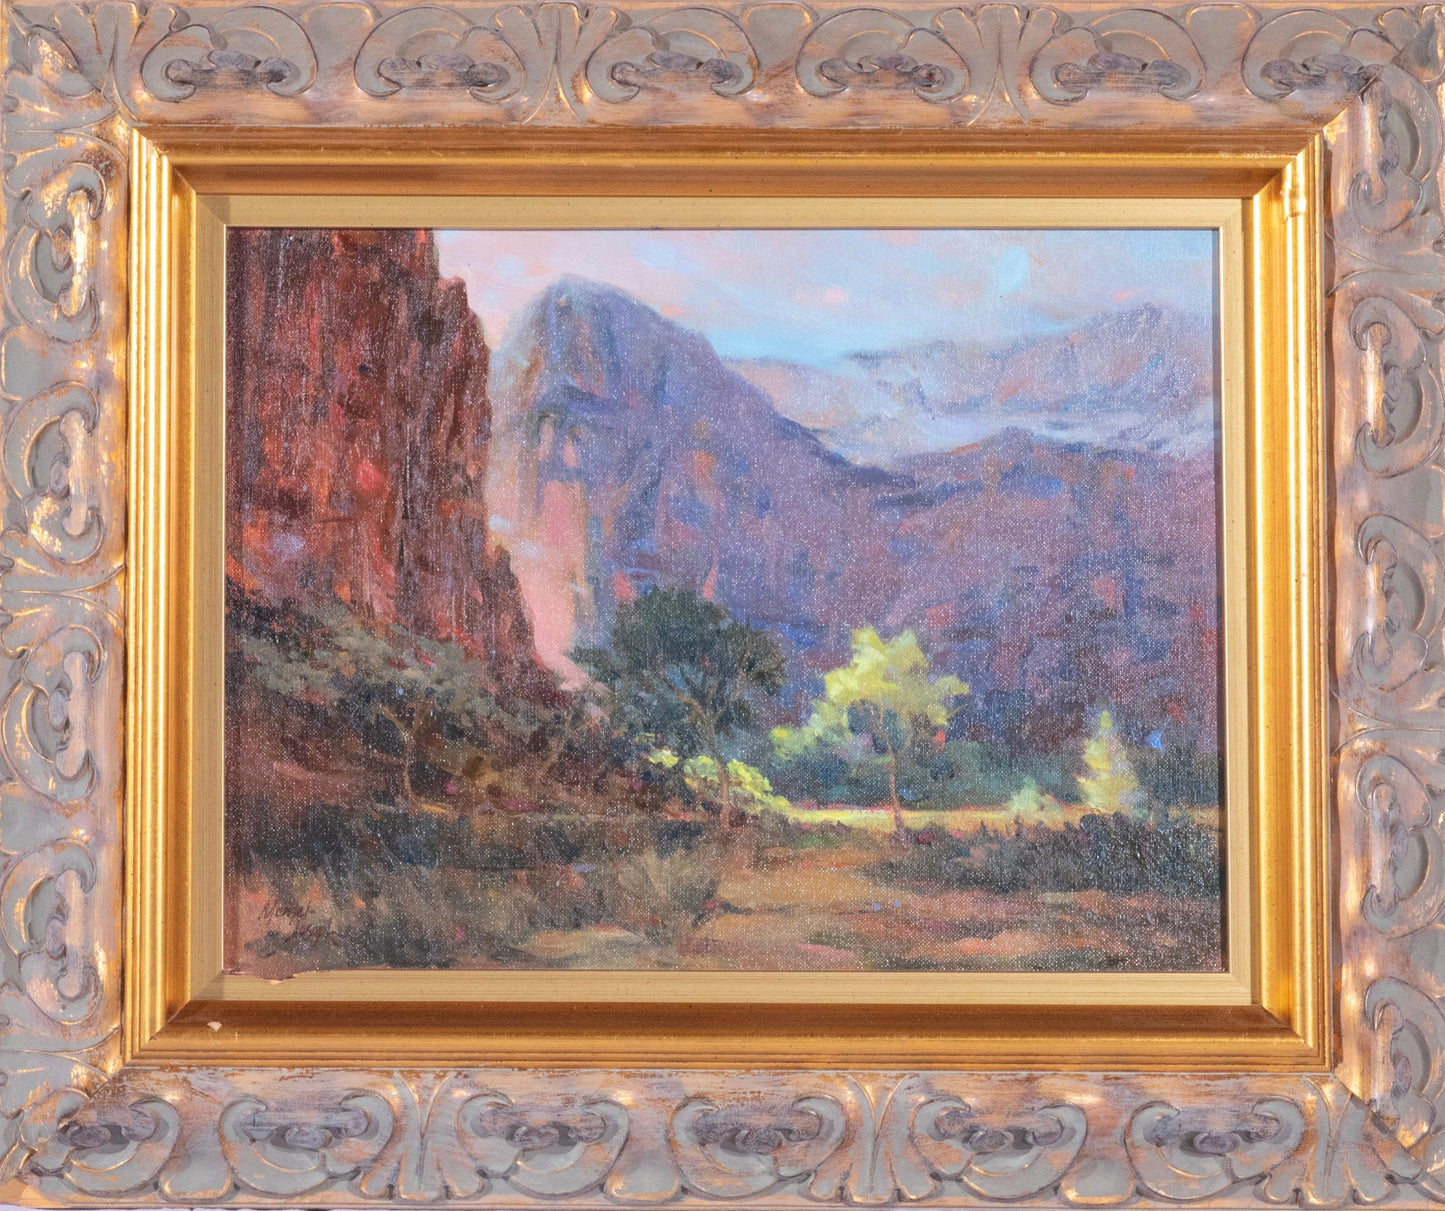 James Menzel-Joseph - Late Afternoon in Zion Valley 11.75” x 15.75